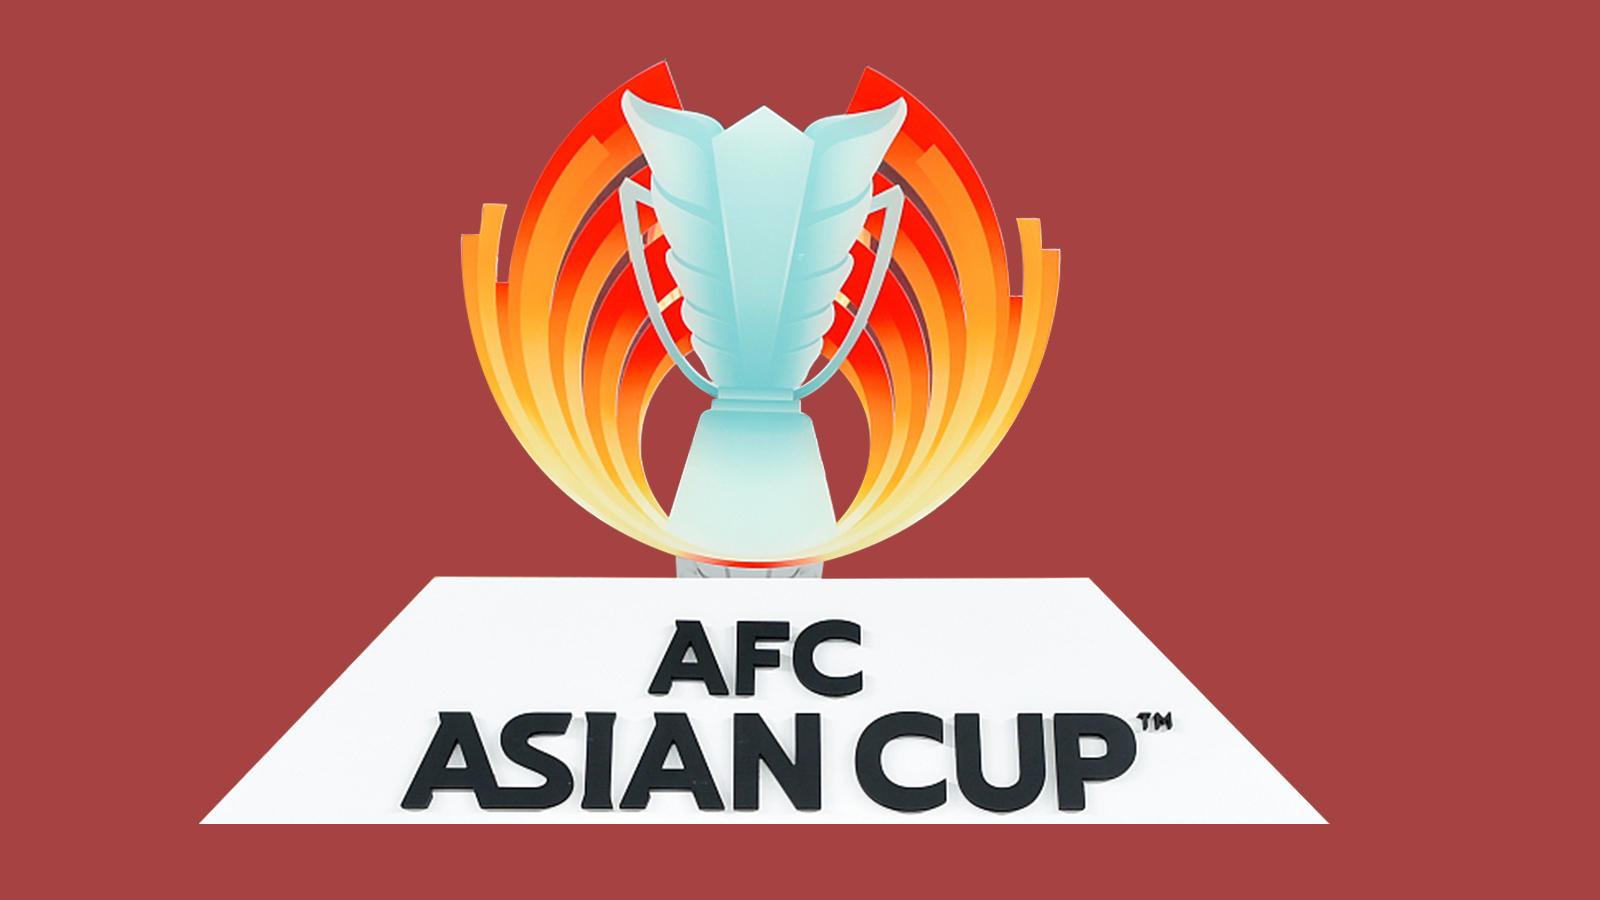 Requirements revealed for countries to host 2023 AFC Asian Cup, report